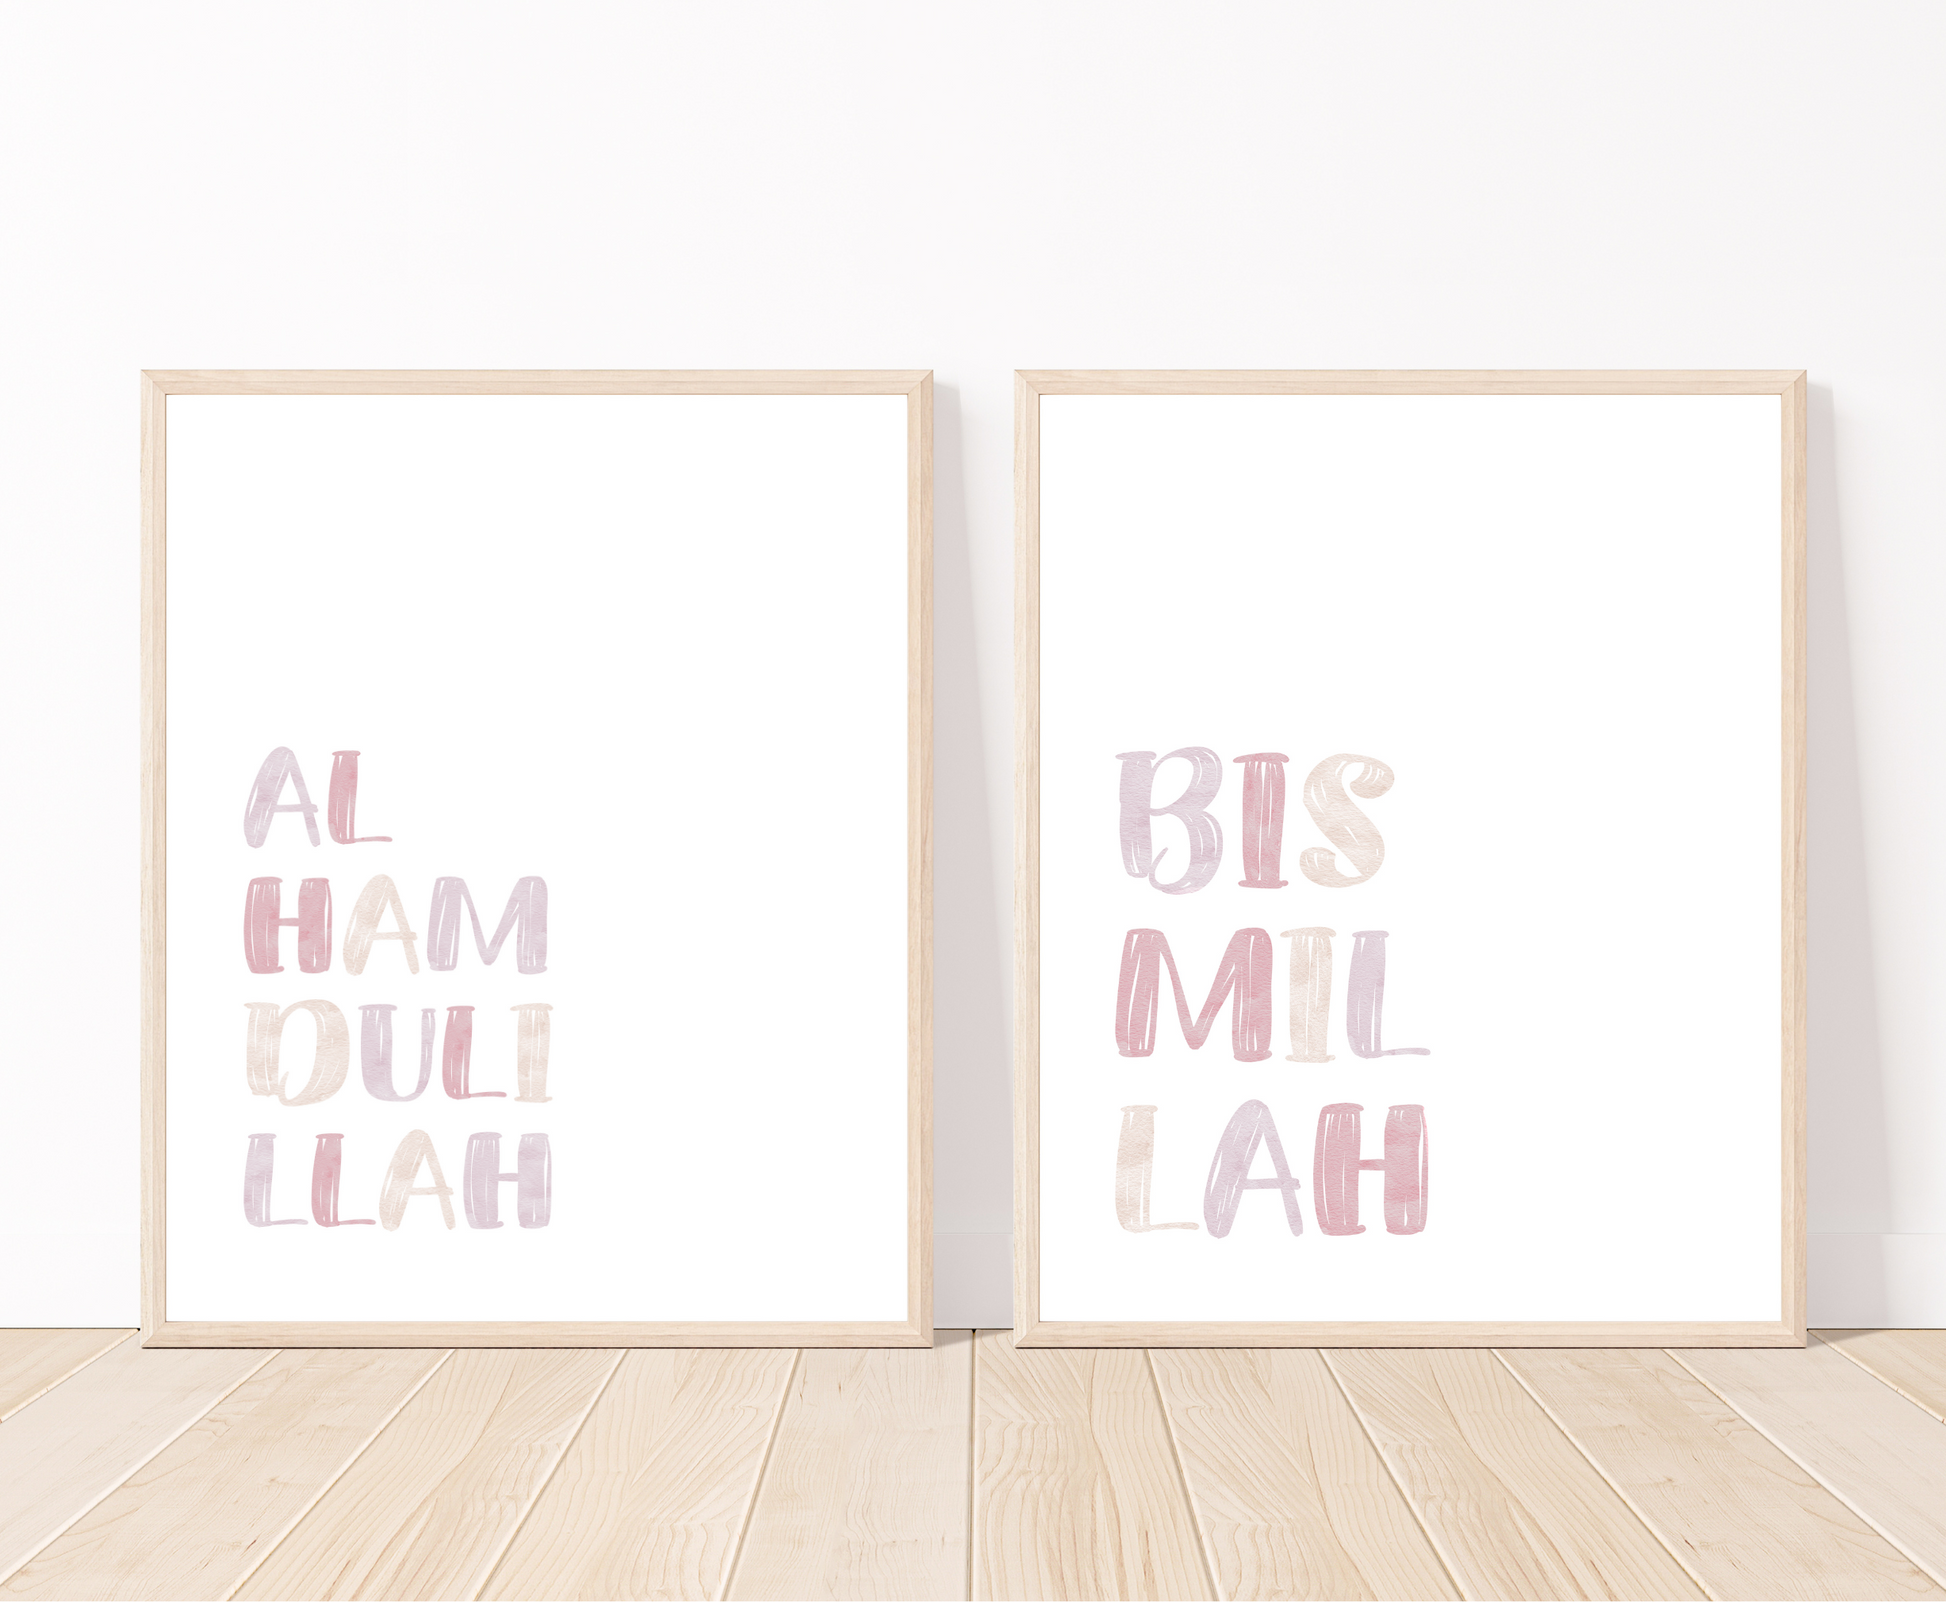 Two large frames. One includes “Allhamdulillah” in bold pink and purple upper case letters with a white background, and the other one has the word “Bismillah”.